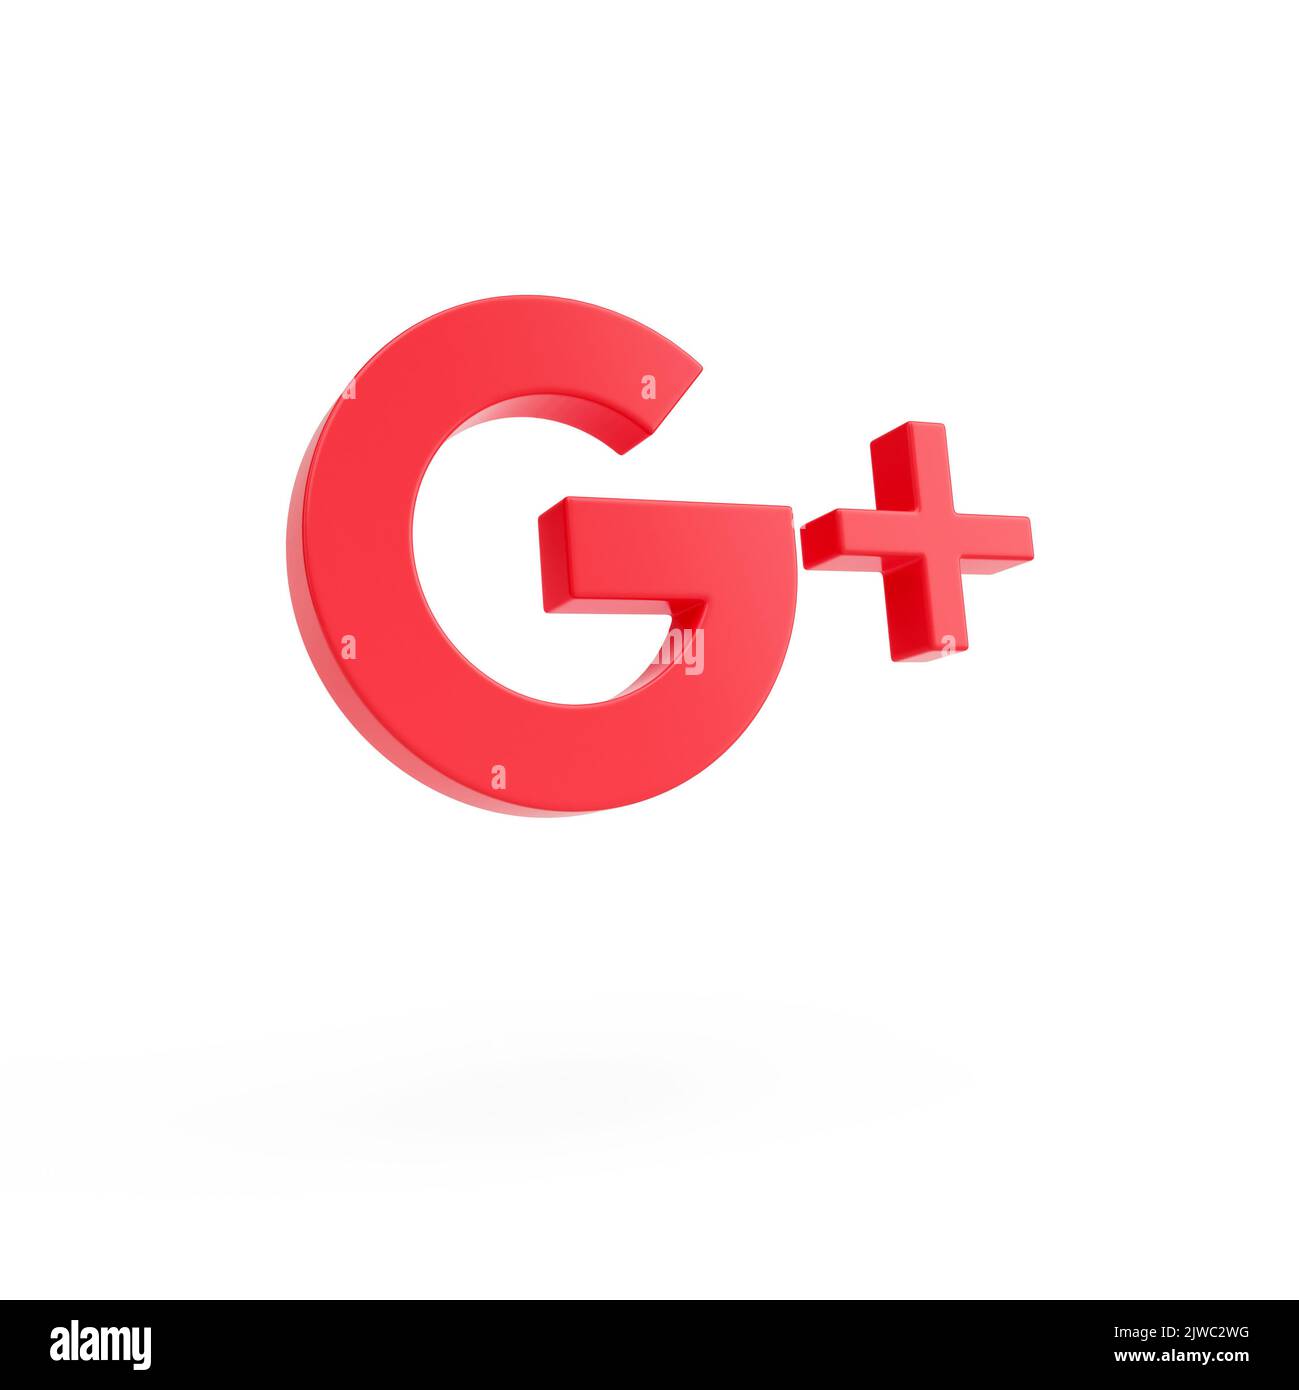 Google Plus - realistic 3D social media logo floating isolated on a white background with shadow - 3D render Stock Photo